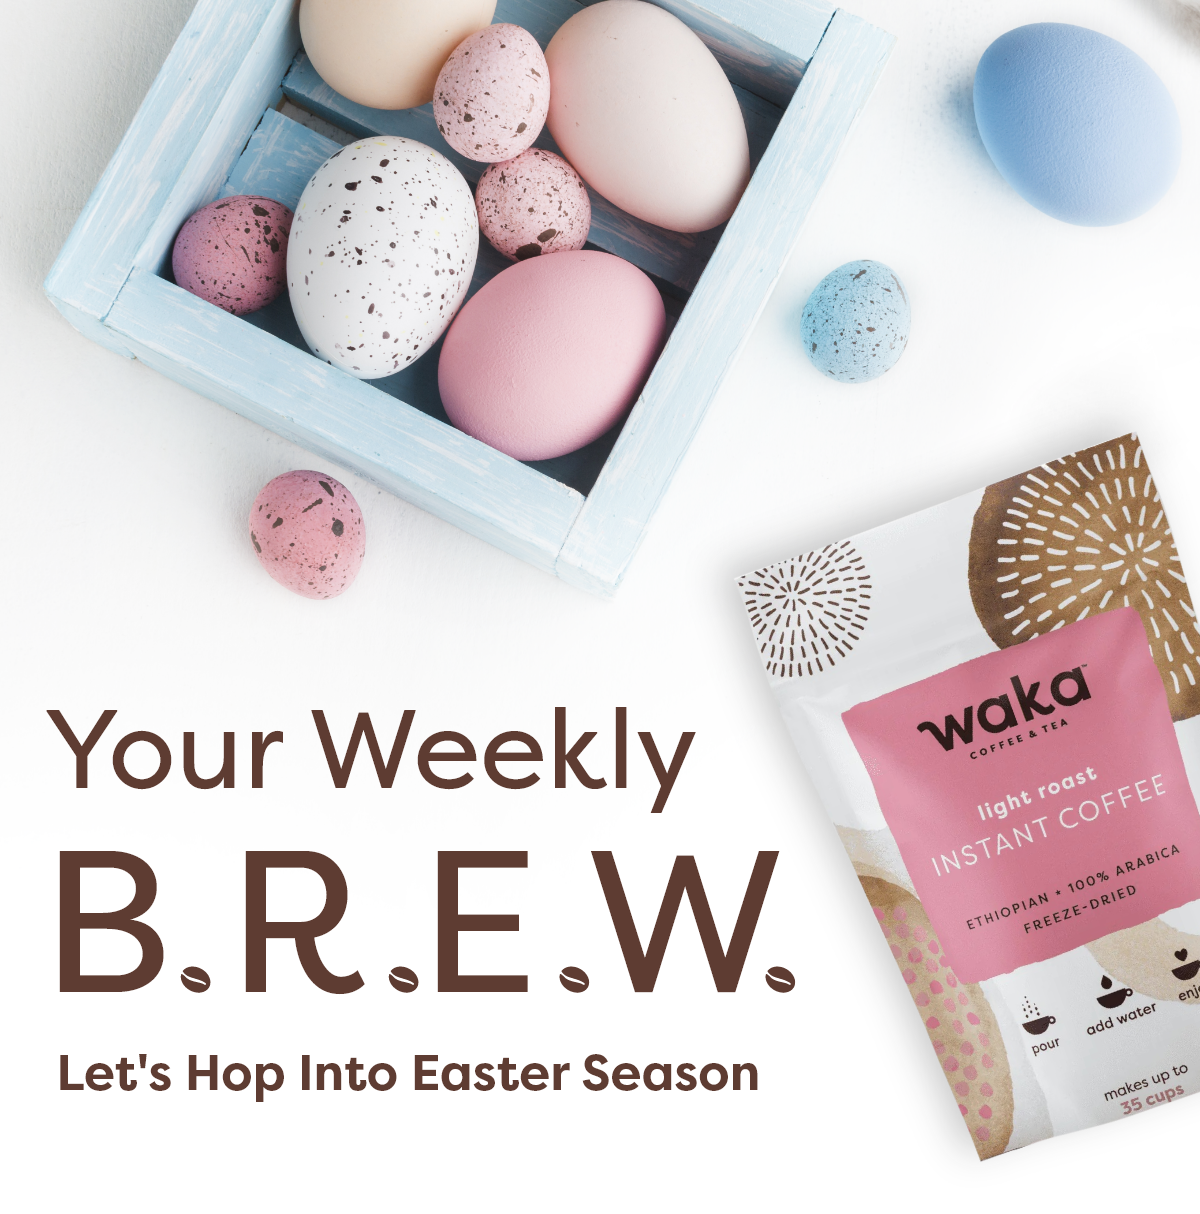 Your Weekly B.R.E.W. Let's Hop Into Easter Season